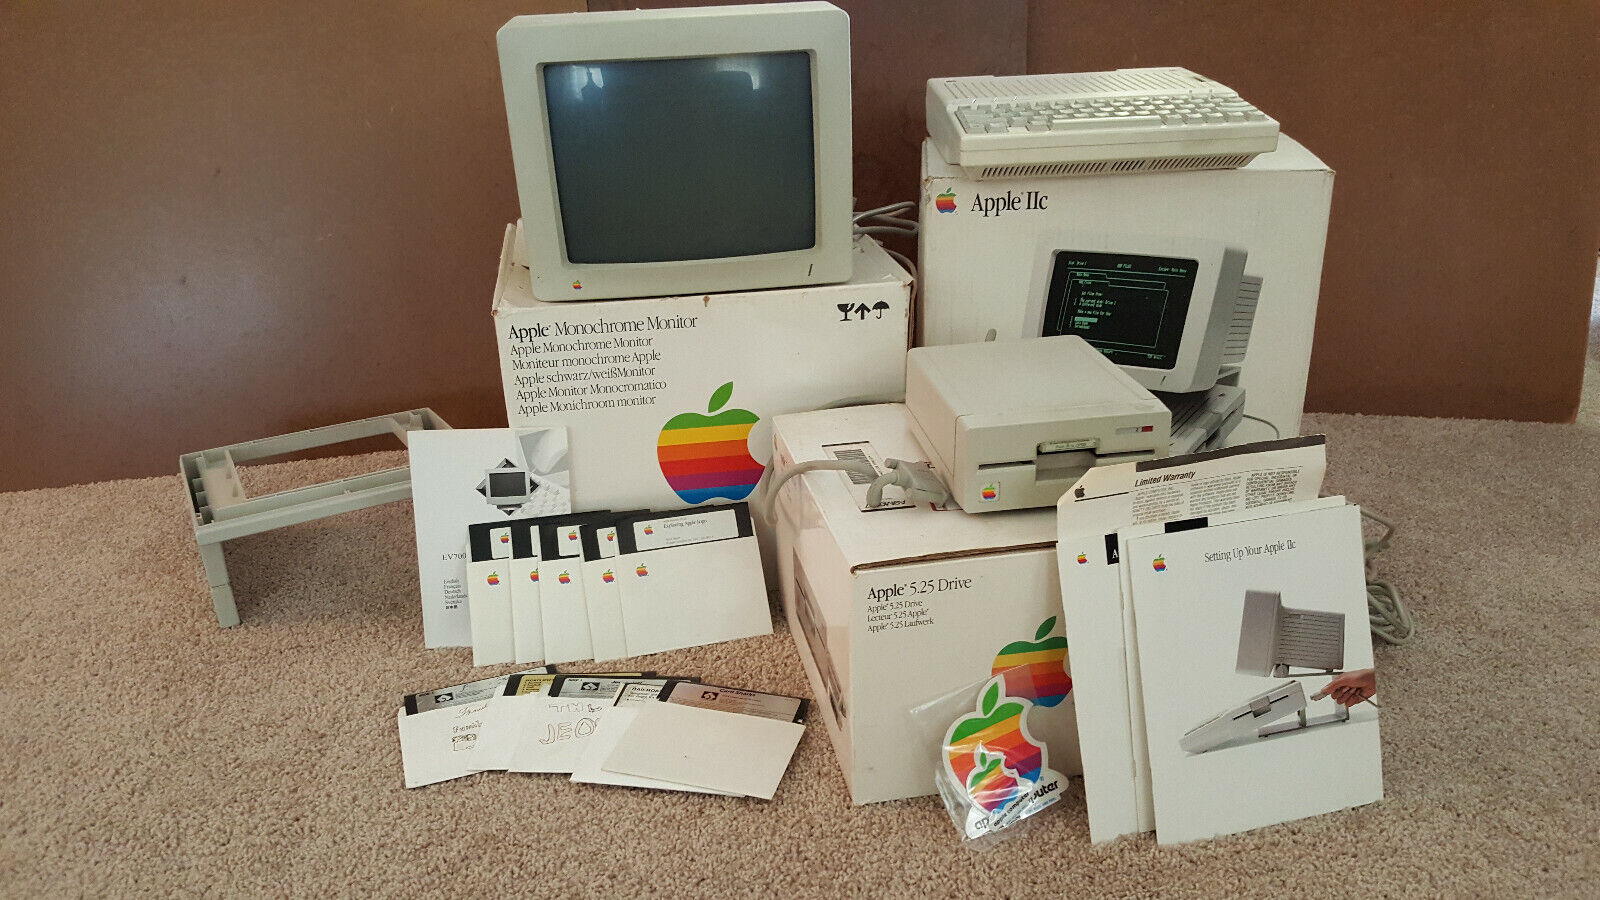 Vintage Apple IIc Computer, Monitor, Stand, Printer, and extras - Original Boxes